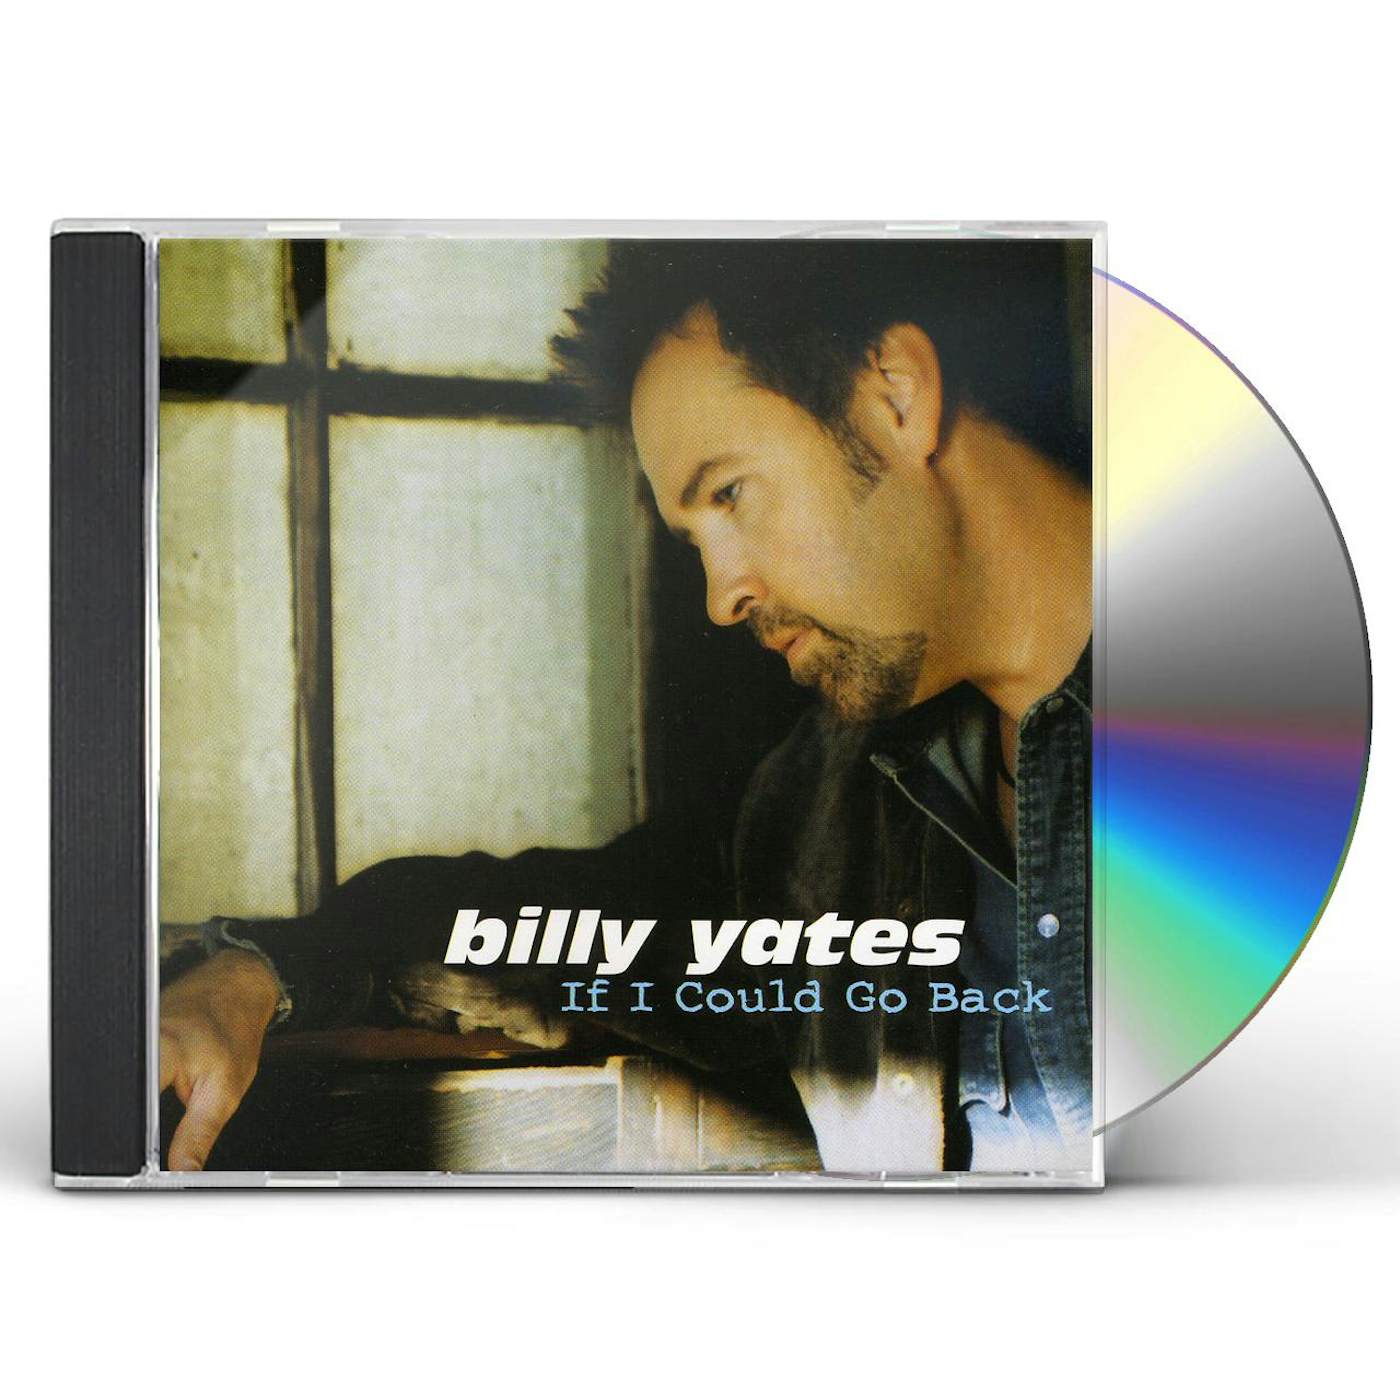 Billy Yates IF I COULD GO BACK CD